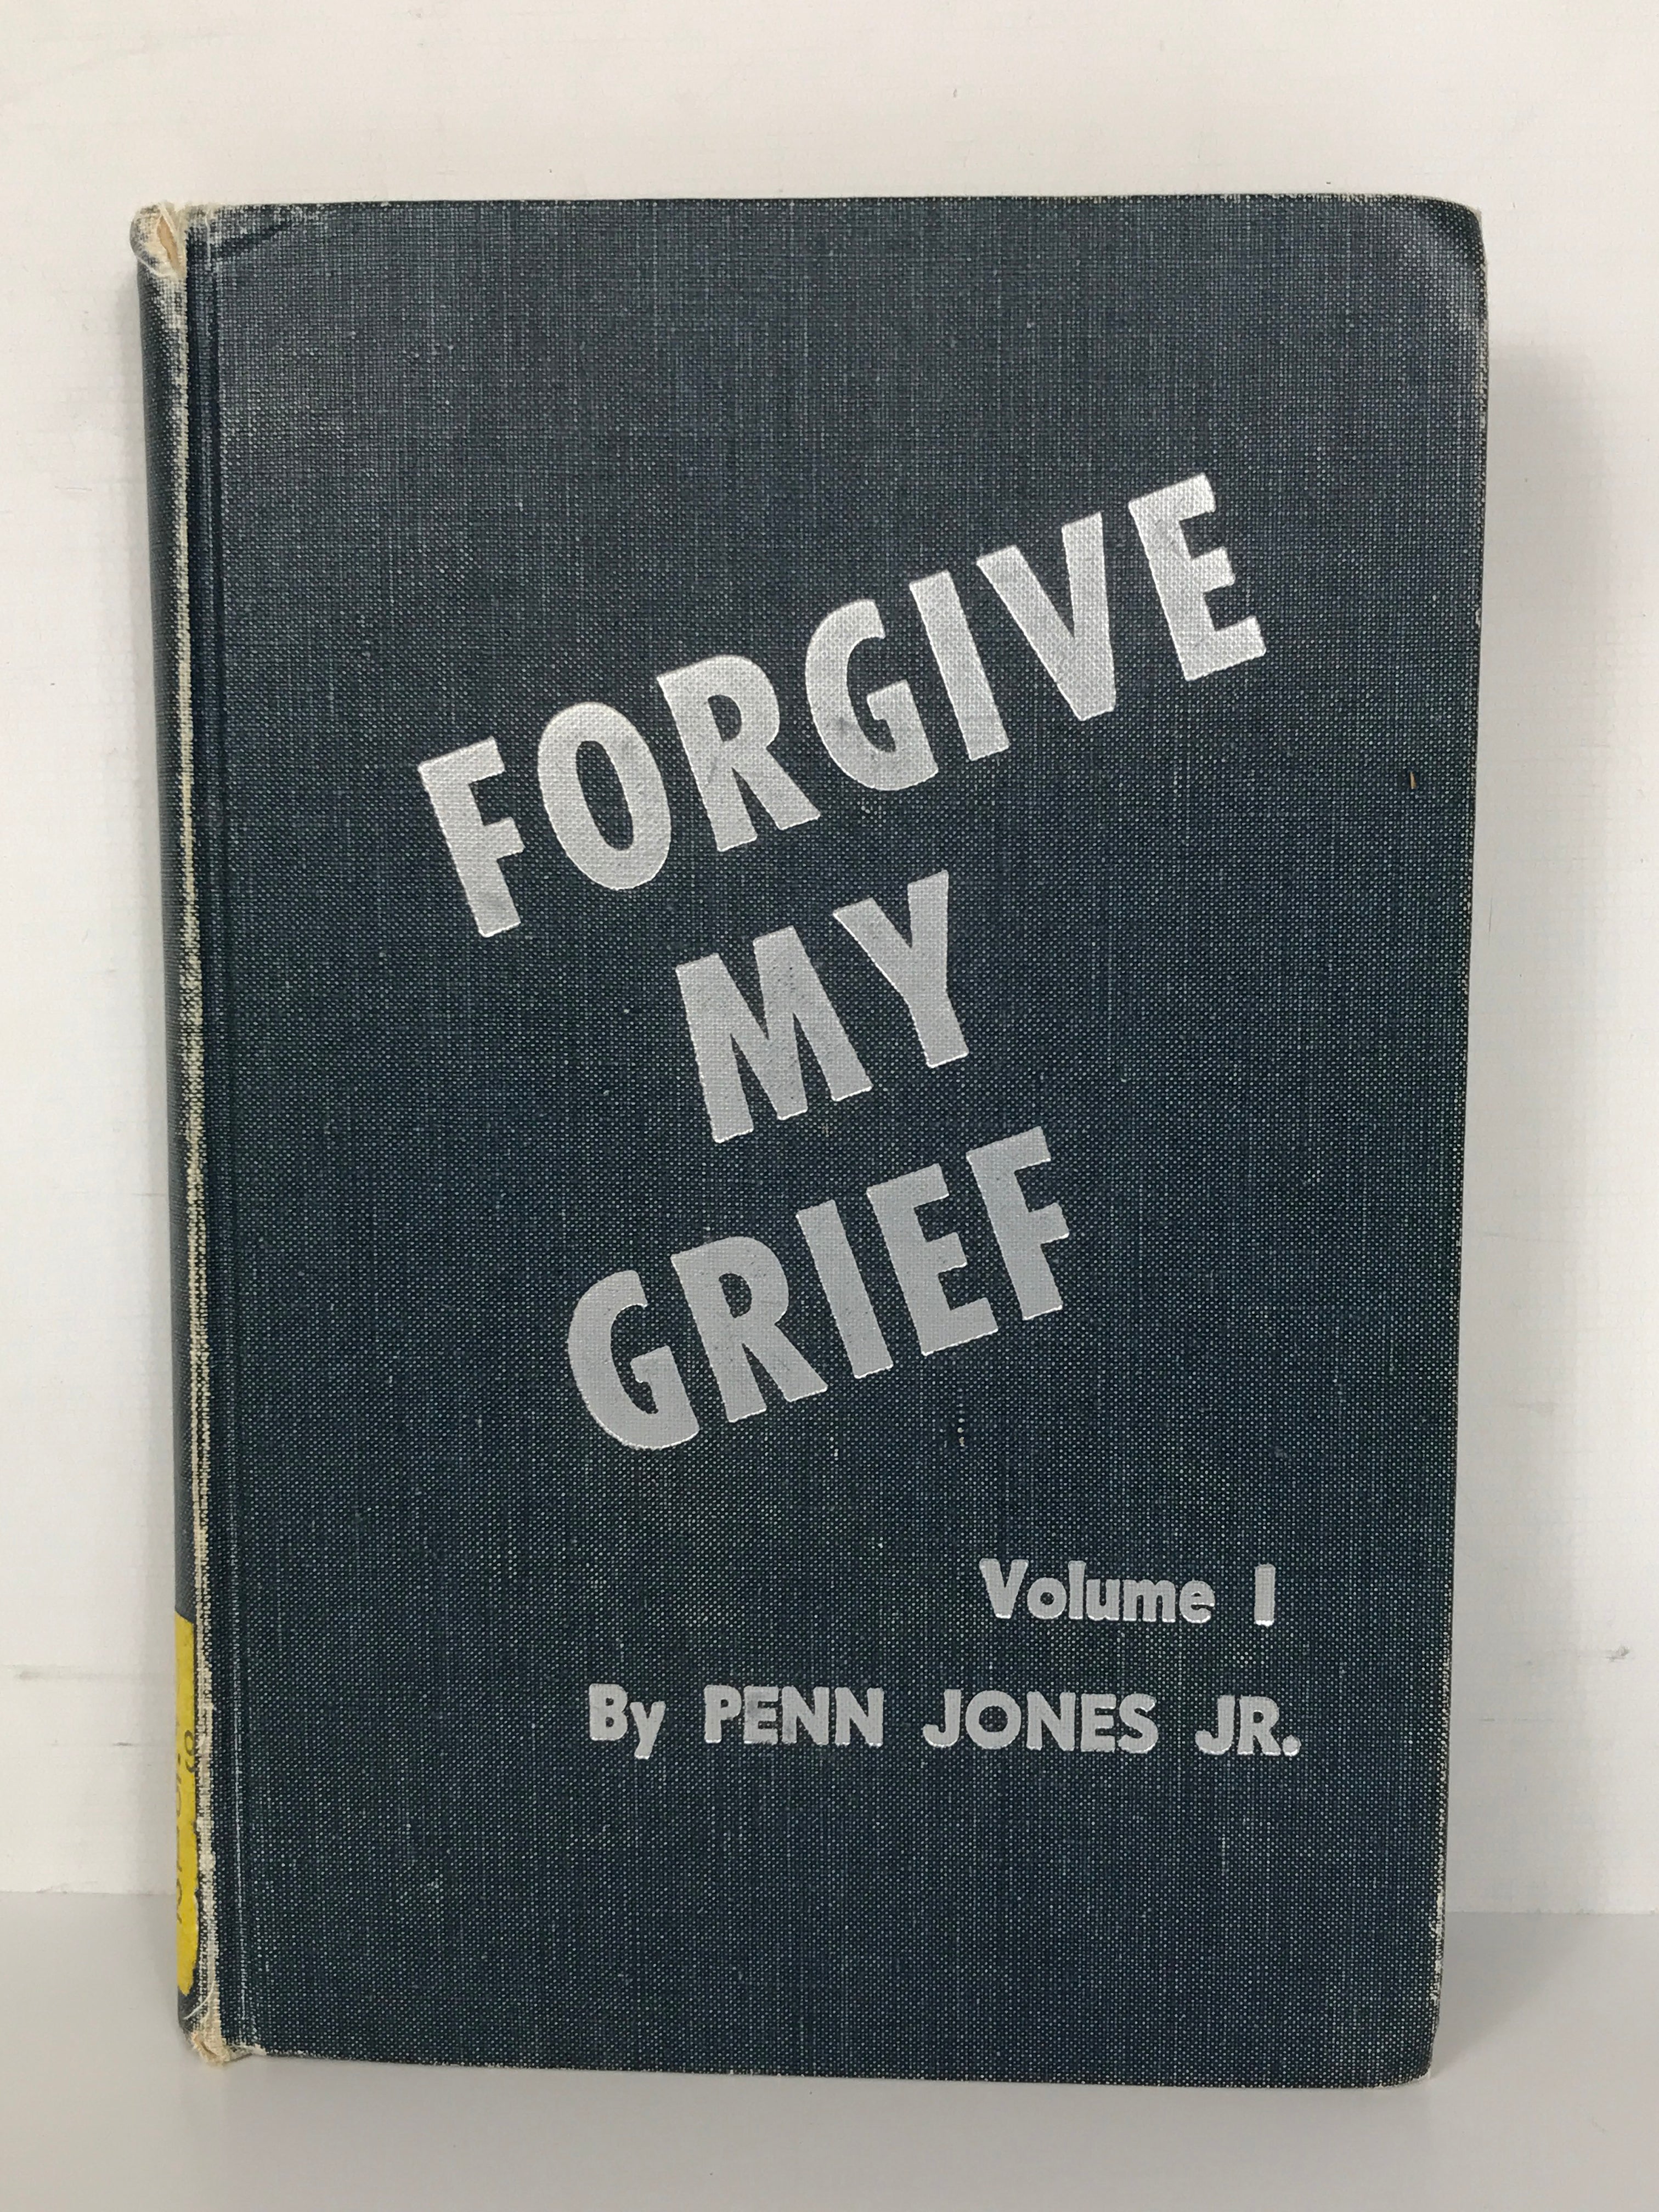 Forgive My Grief by Penn Jones Jr. Volume 1 First Printing HC A Critical Review of the Warren Commission Report